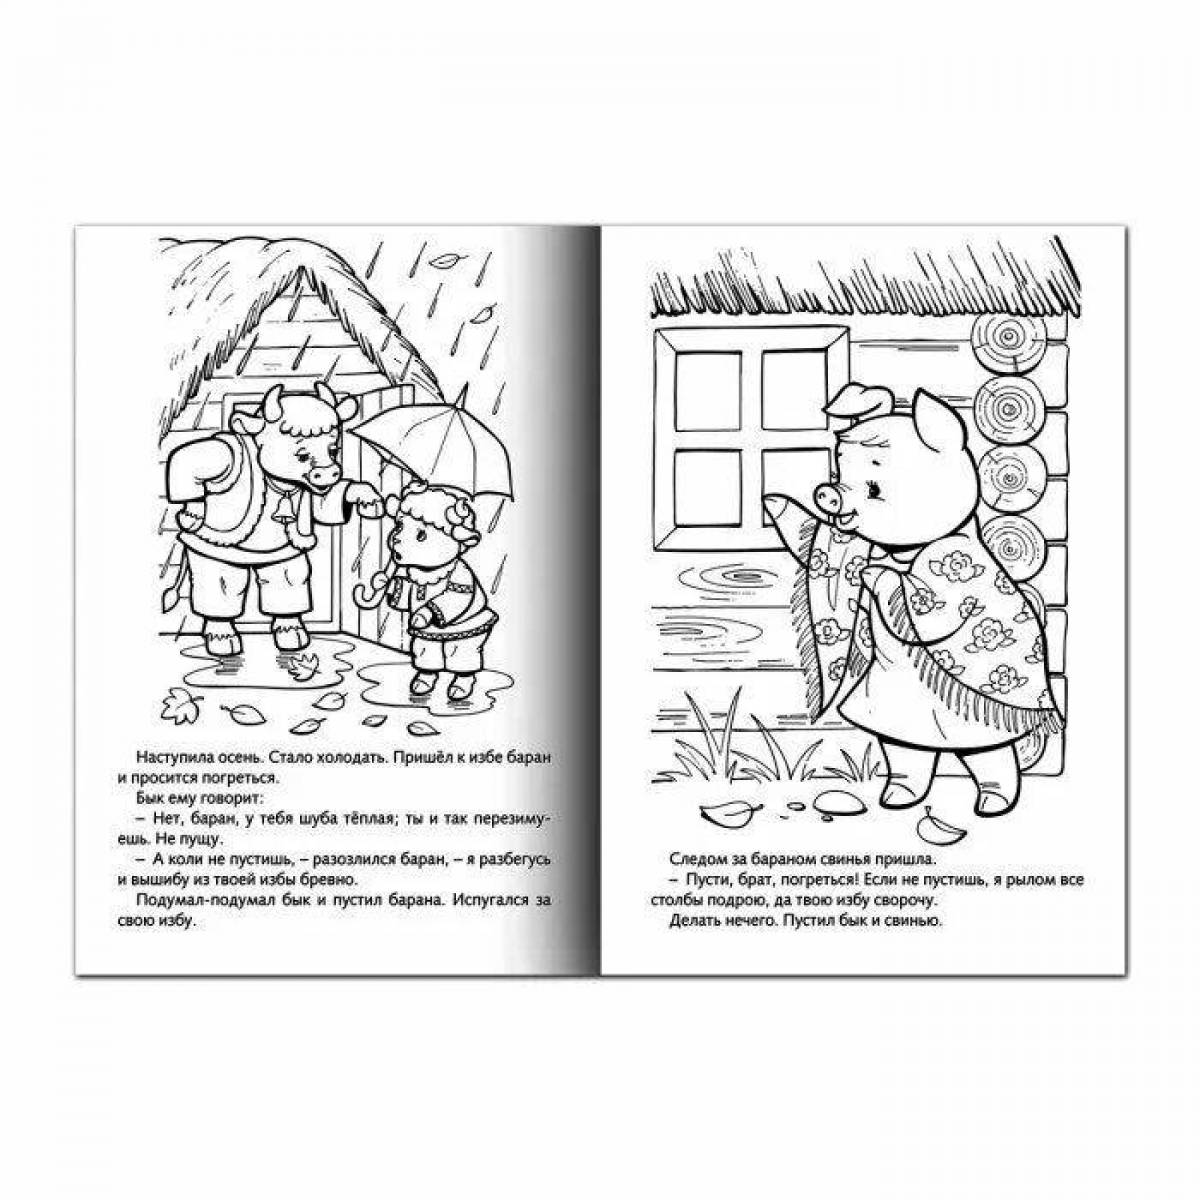 Playful coloring book winter hut of animals Russian folk tale